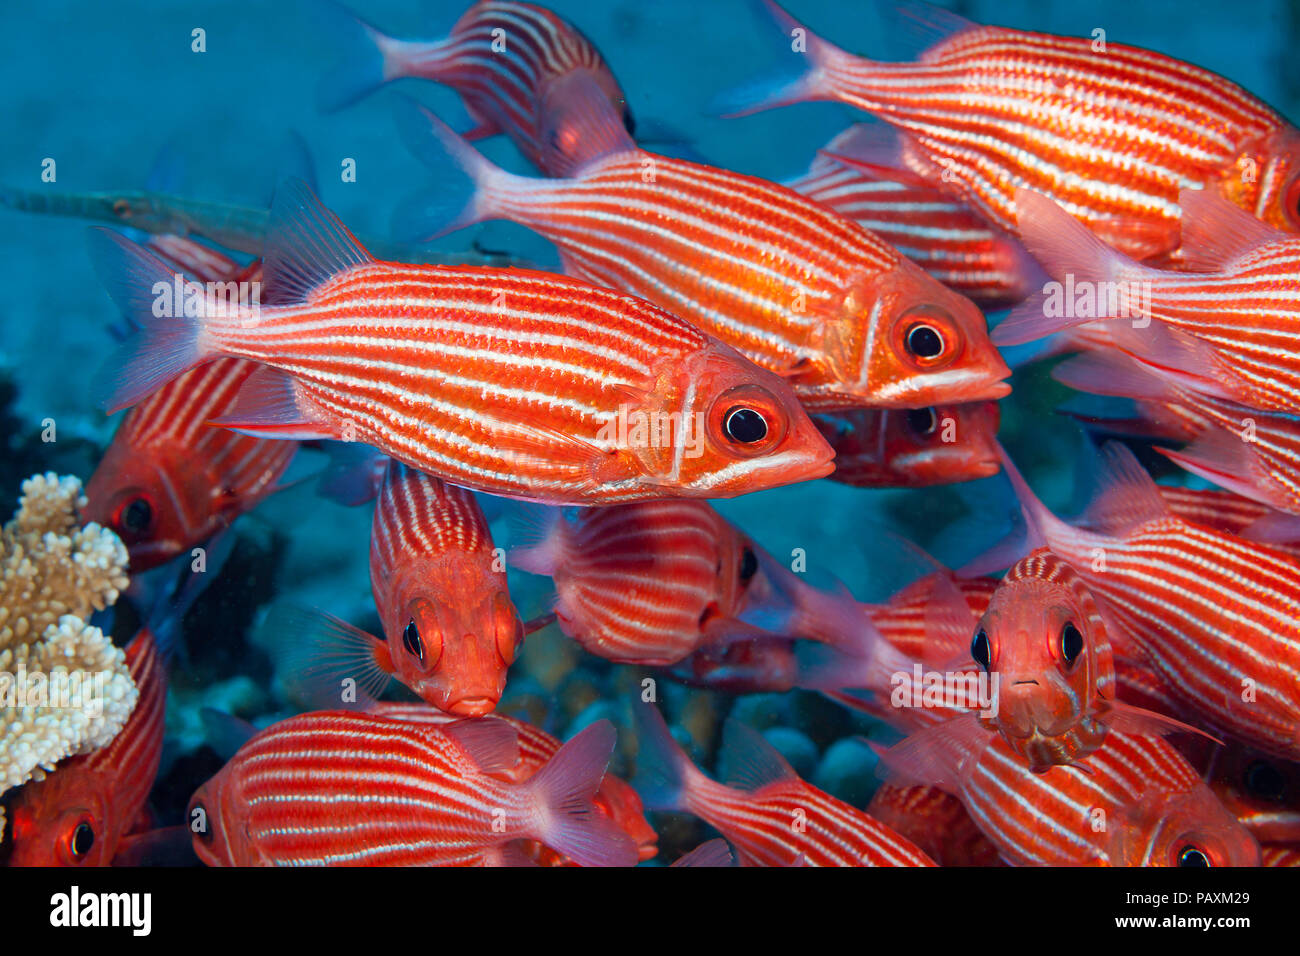 Hawaiian squirrelfish, Sargocentron xantherythrum, are an endemic species and one of the most common squirrelfish seen on Hawaii’s reefs. Stock Photo